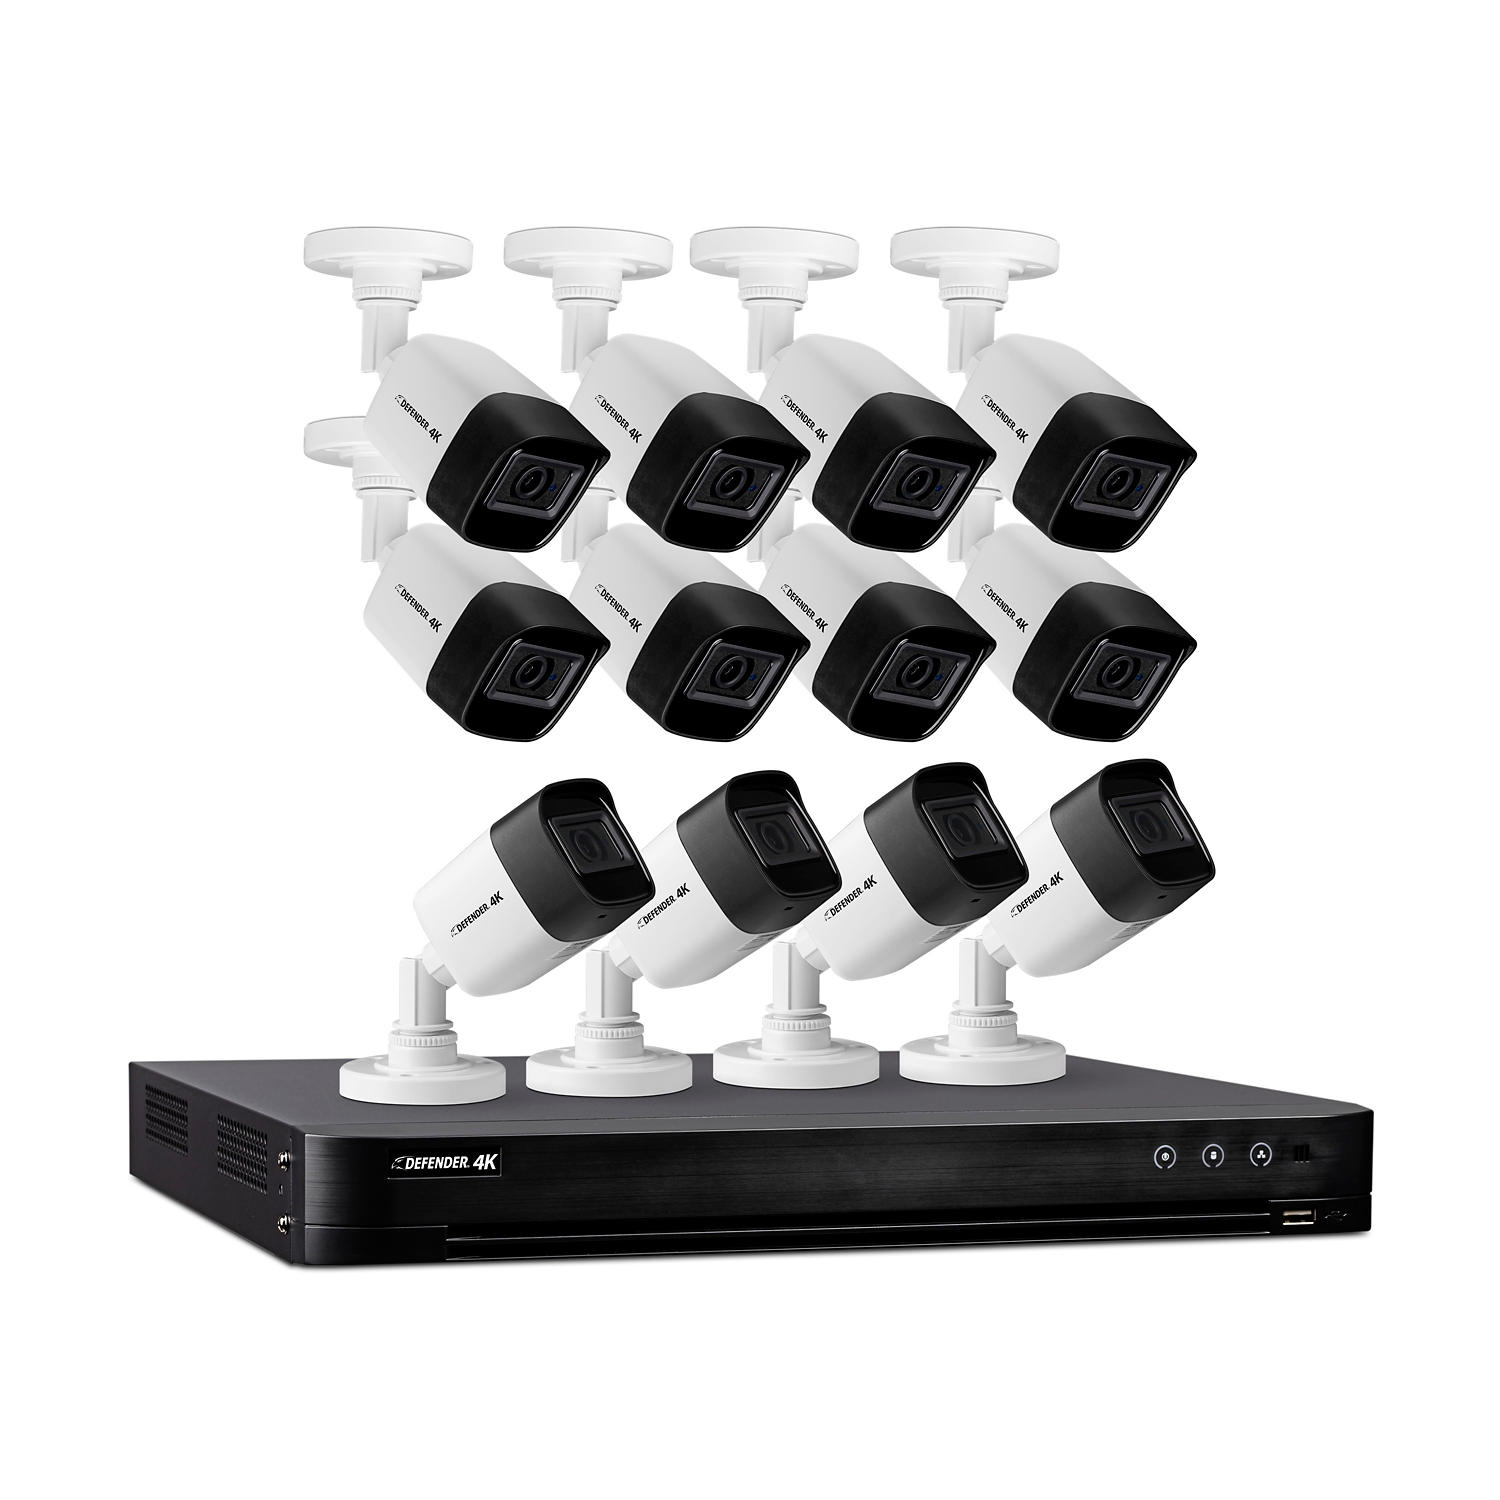 Defender (4k4T16B12) Ultra HD 4K (8MP) 4TB Wired Security Camera System with 12 Night Vision Cameras